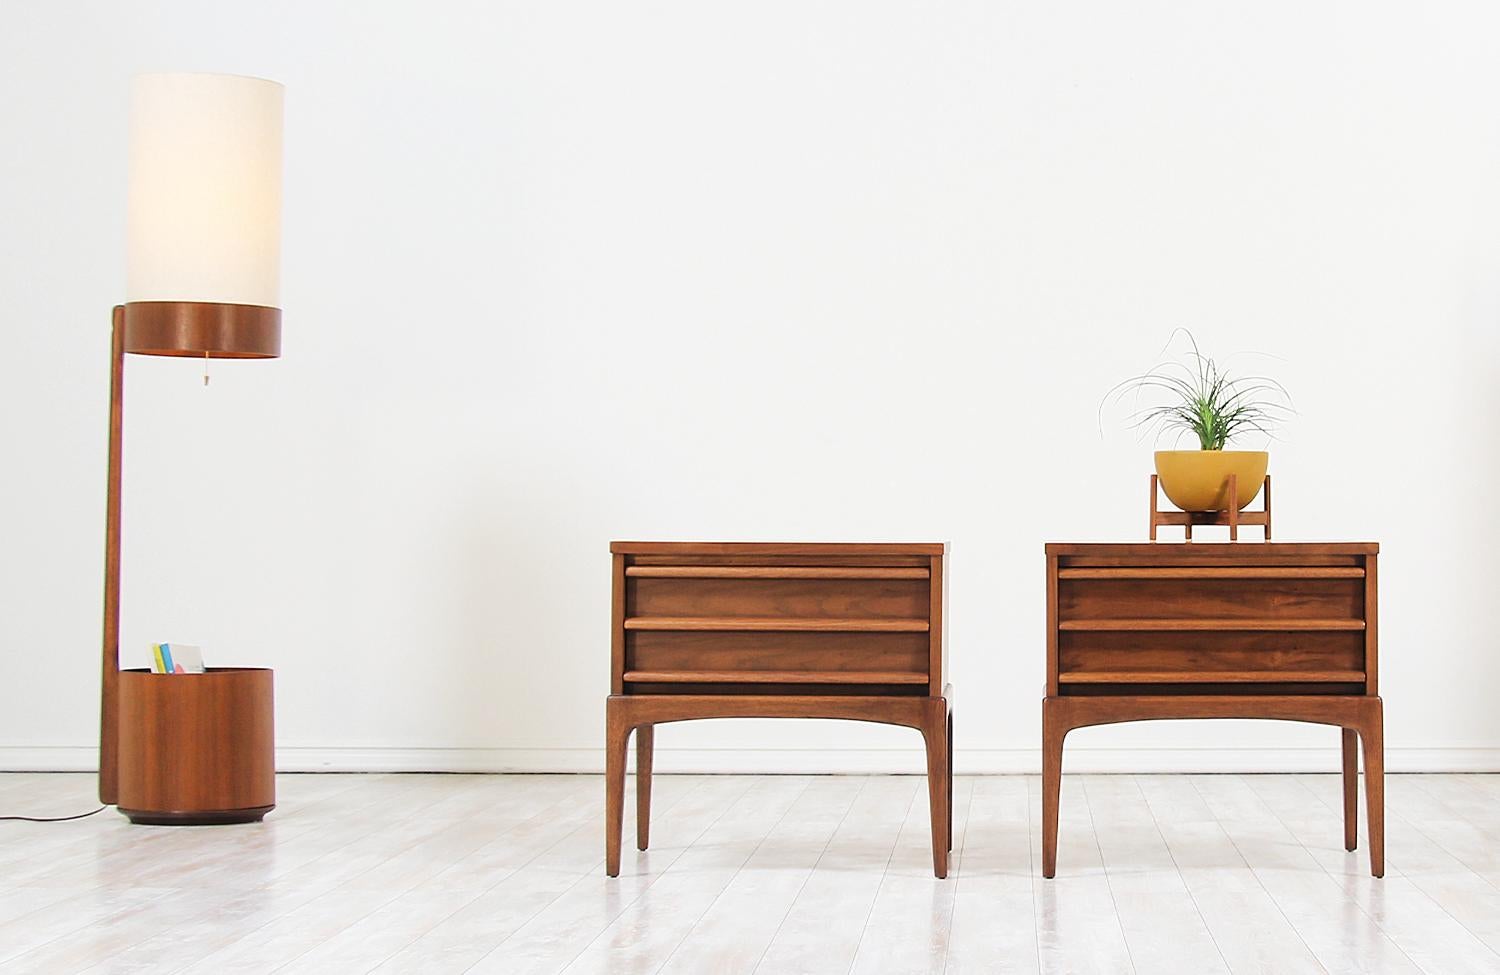 Pair of Mid-Century Modern nightstands designed and manufactured in the United States by Lane Furniture circa 1950s. This beautiful set of night stands feature a sturdy walnut wood case with a sleek and minimal design ideal for modern interiors.